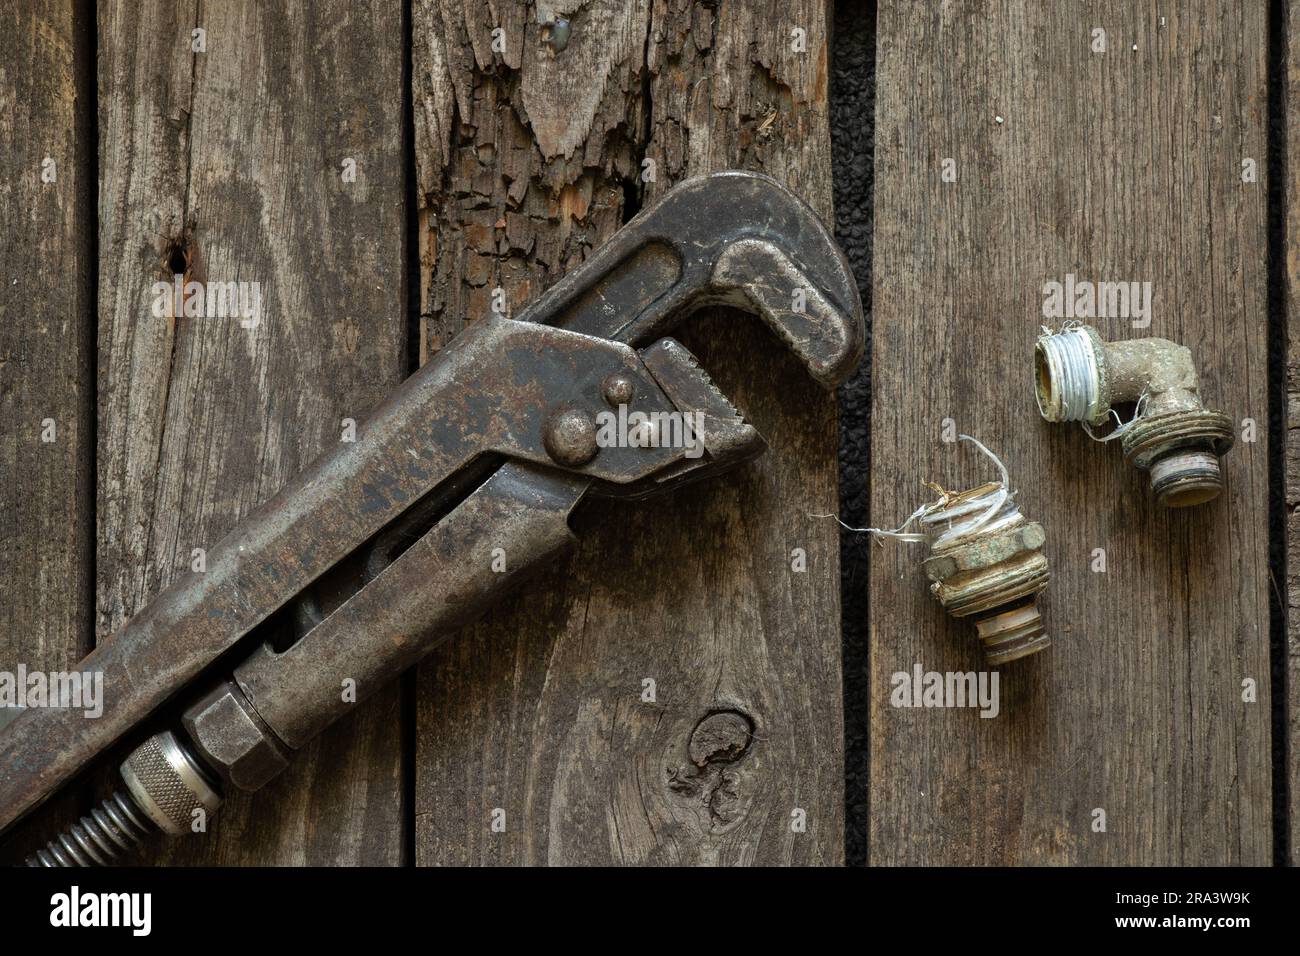 old rusty gas wrench lies on a wooden table close-up Stock Photo